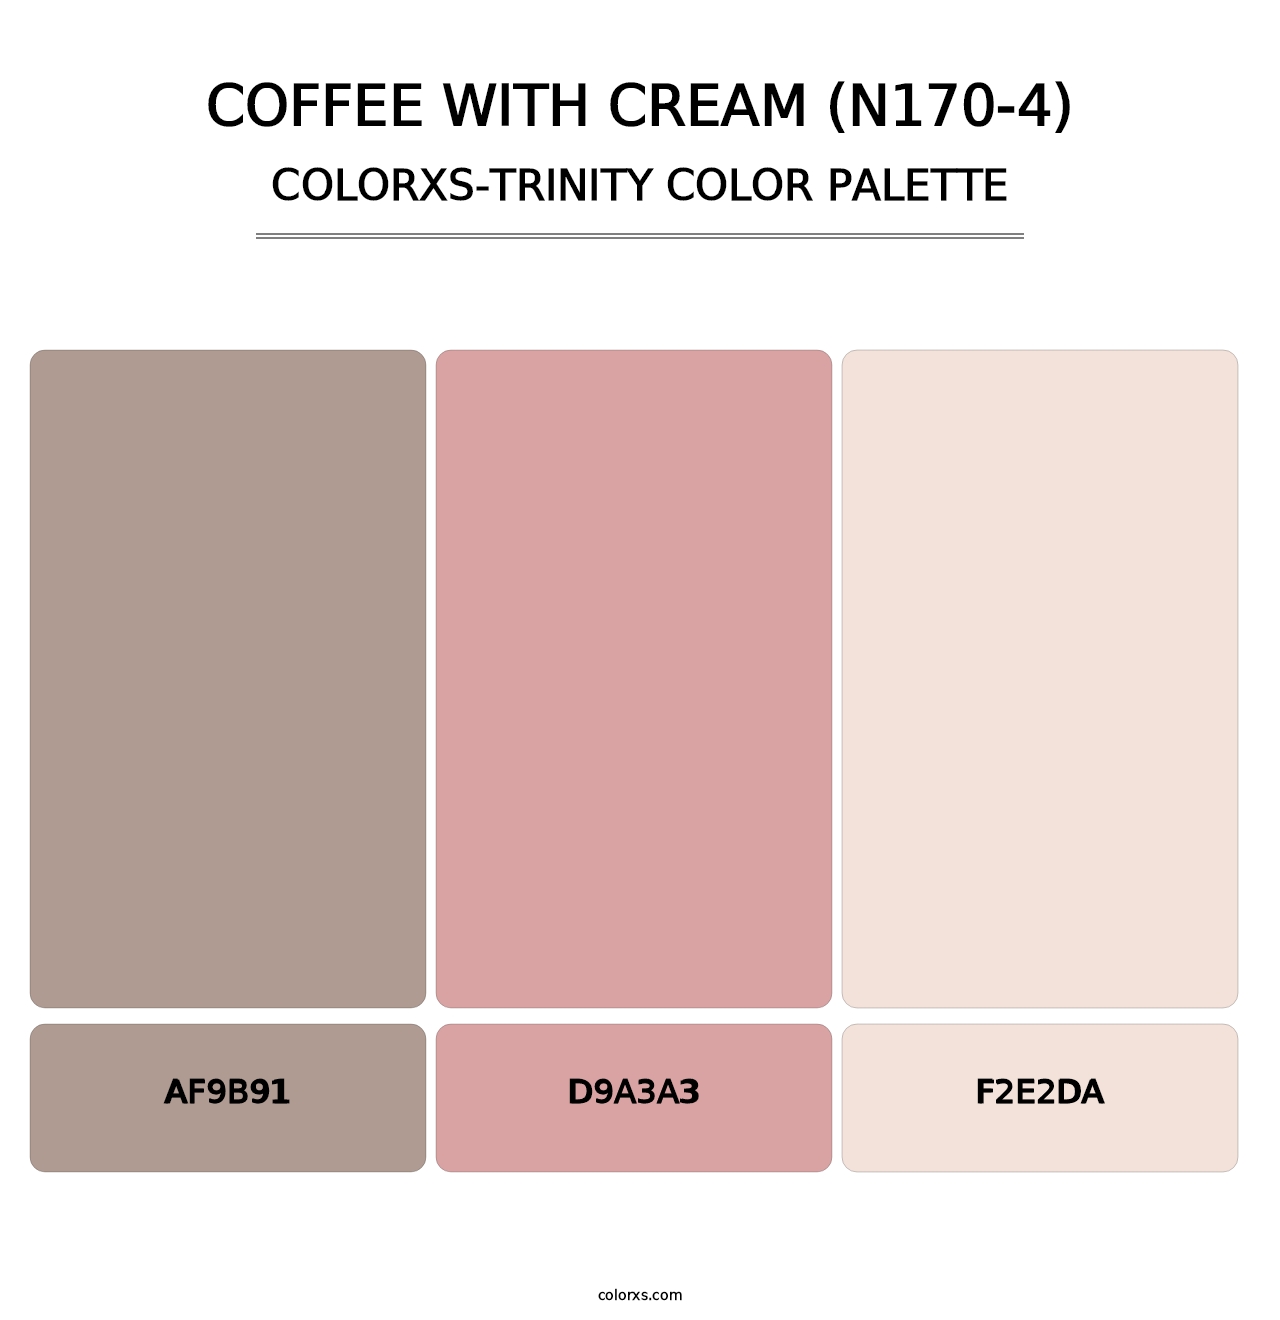 Coffee With Cream (N170-4) - Colorxs Trinity Palette